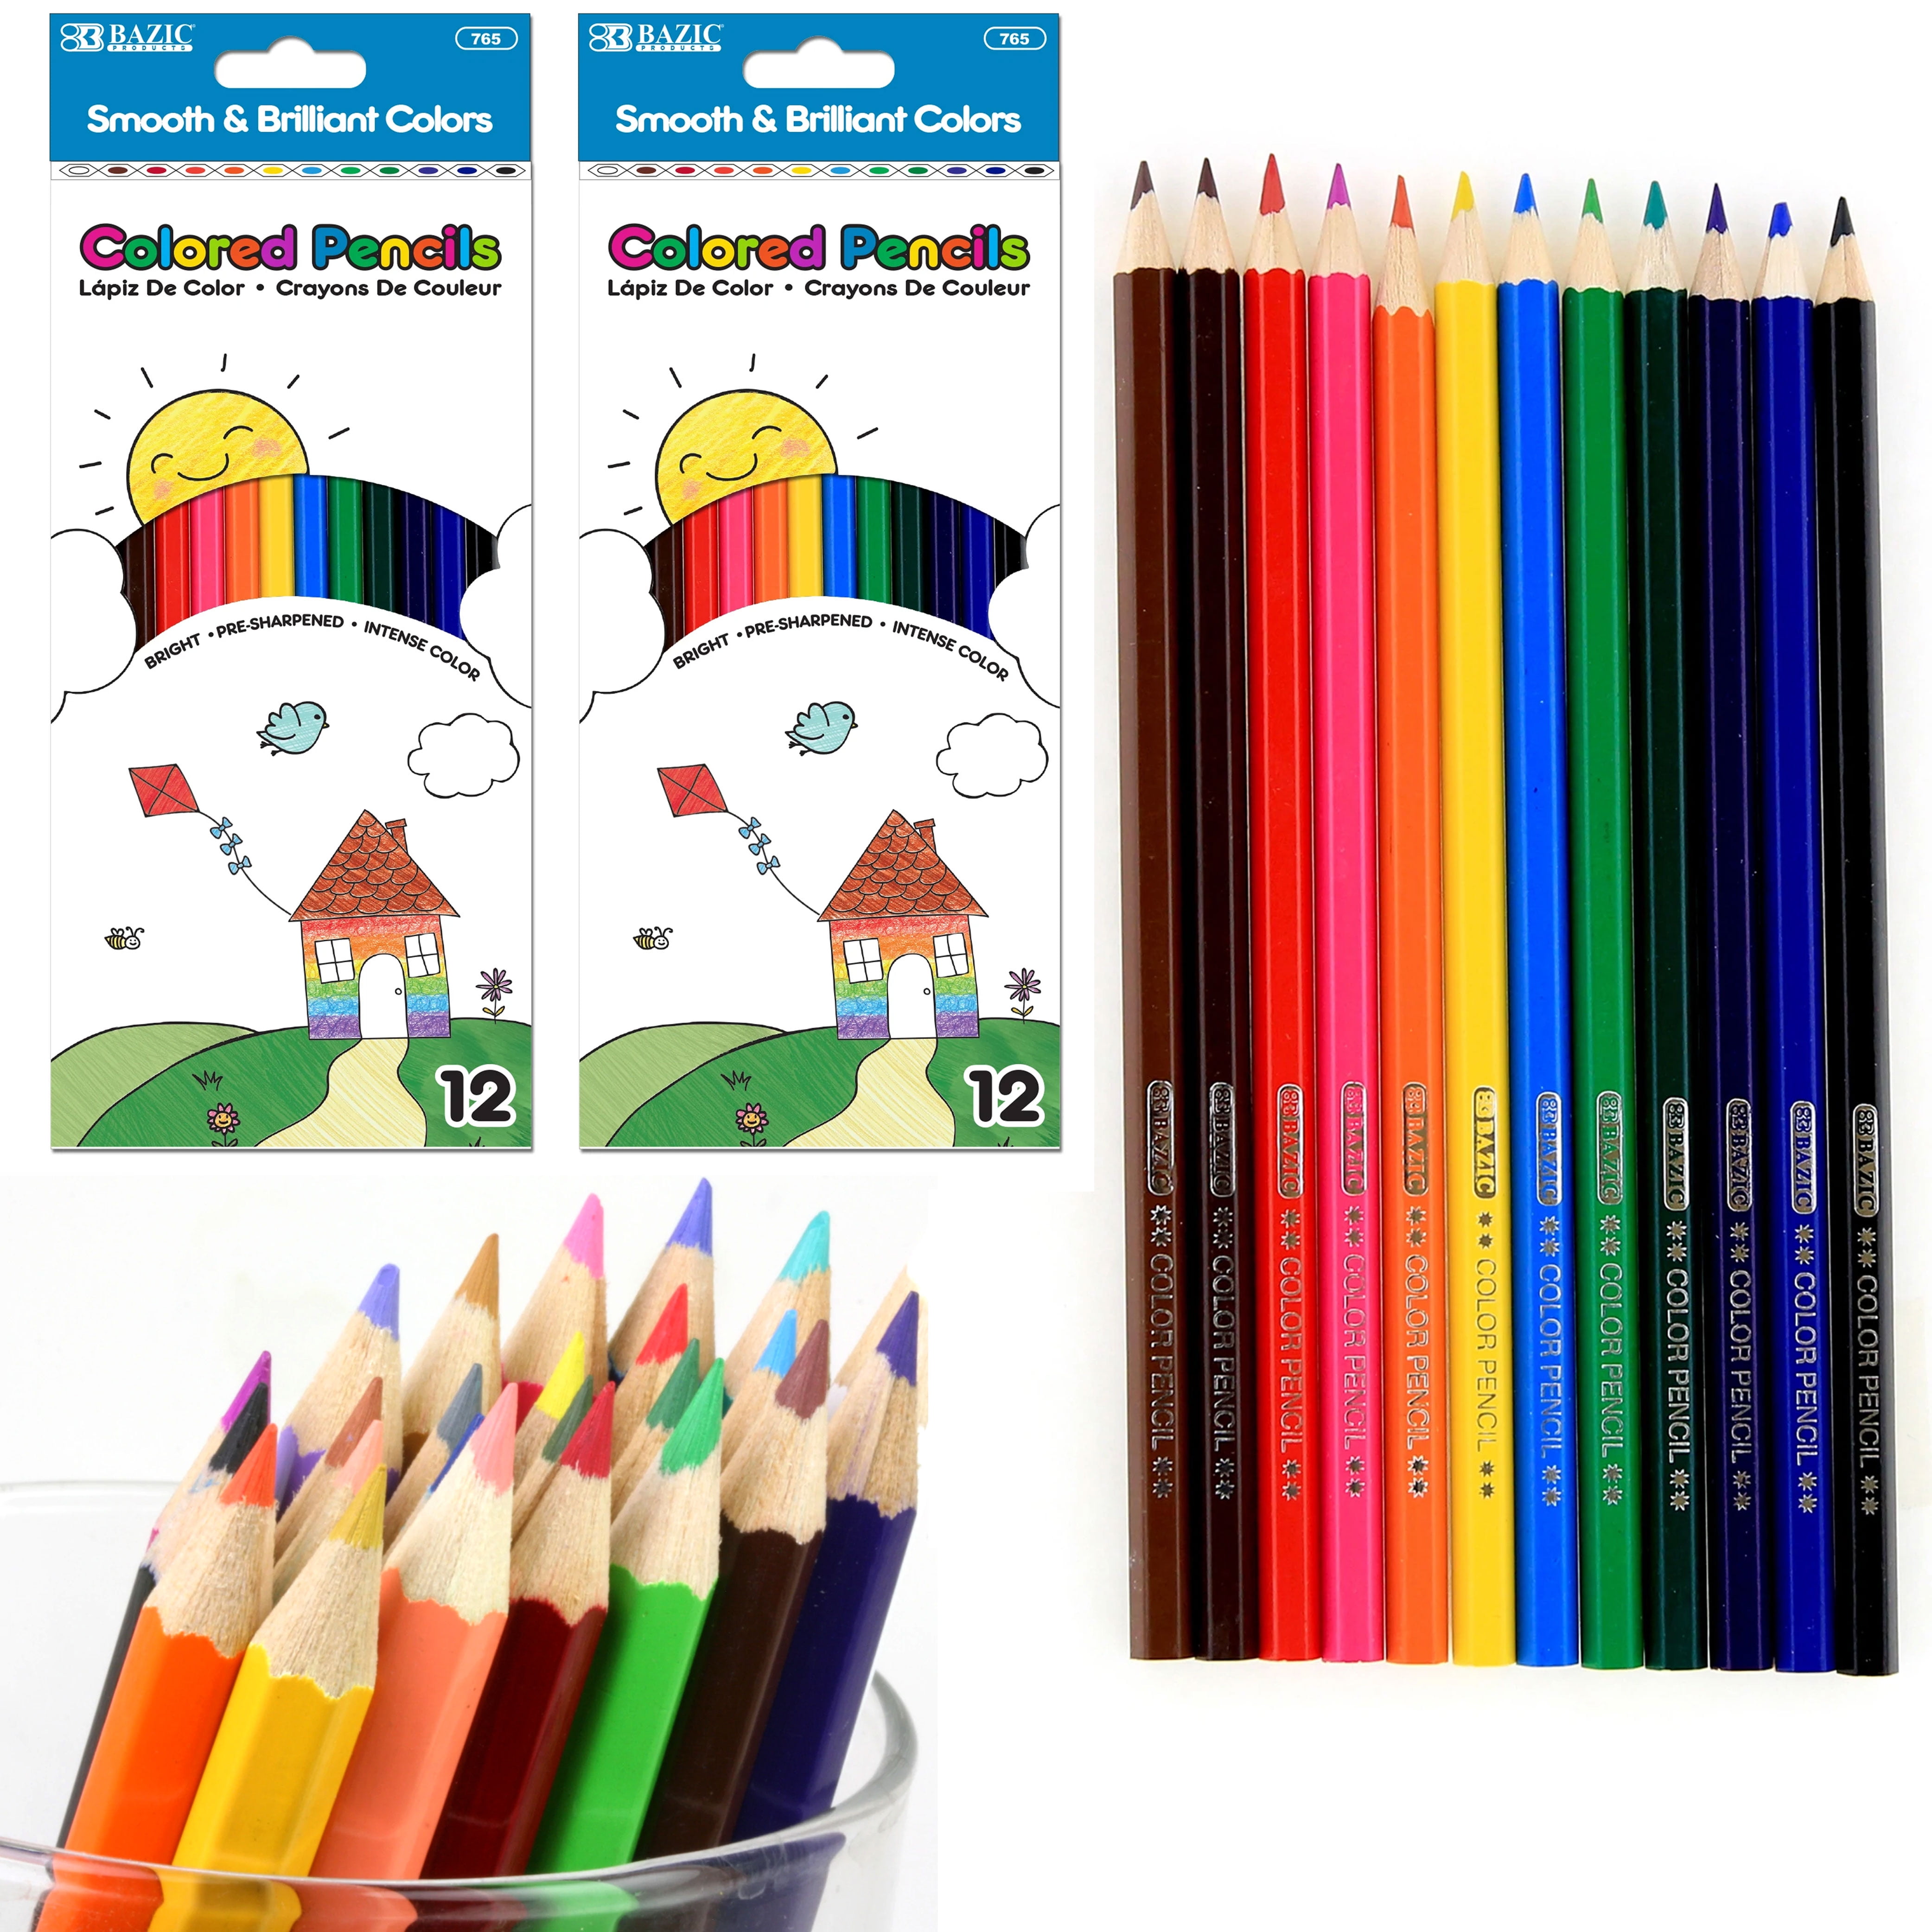 Valor Products Colored Pencils, Pre-sharpened